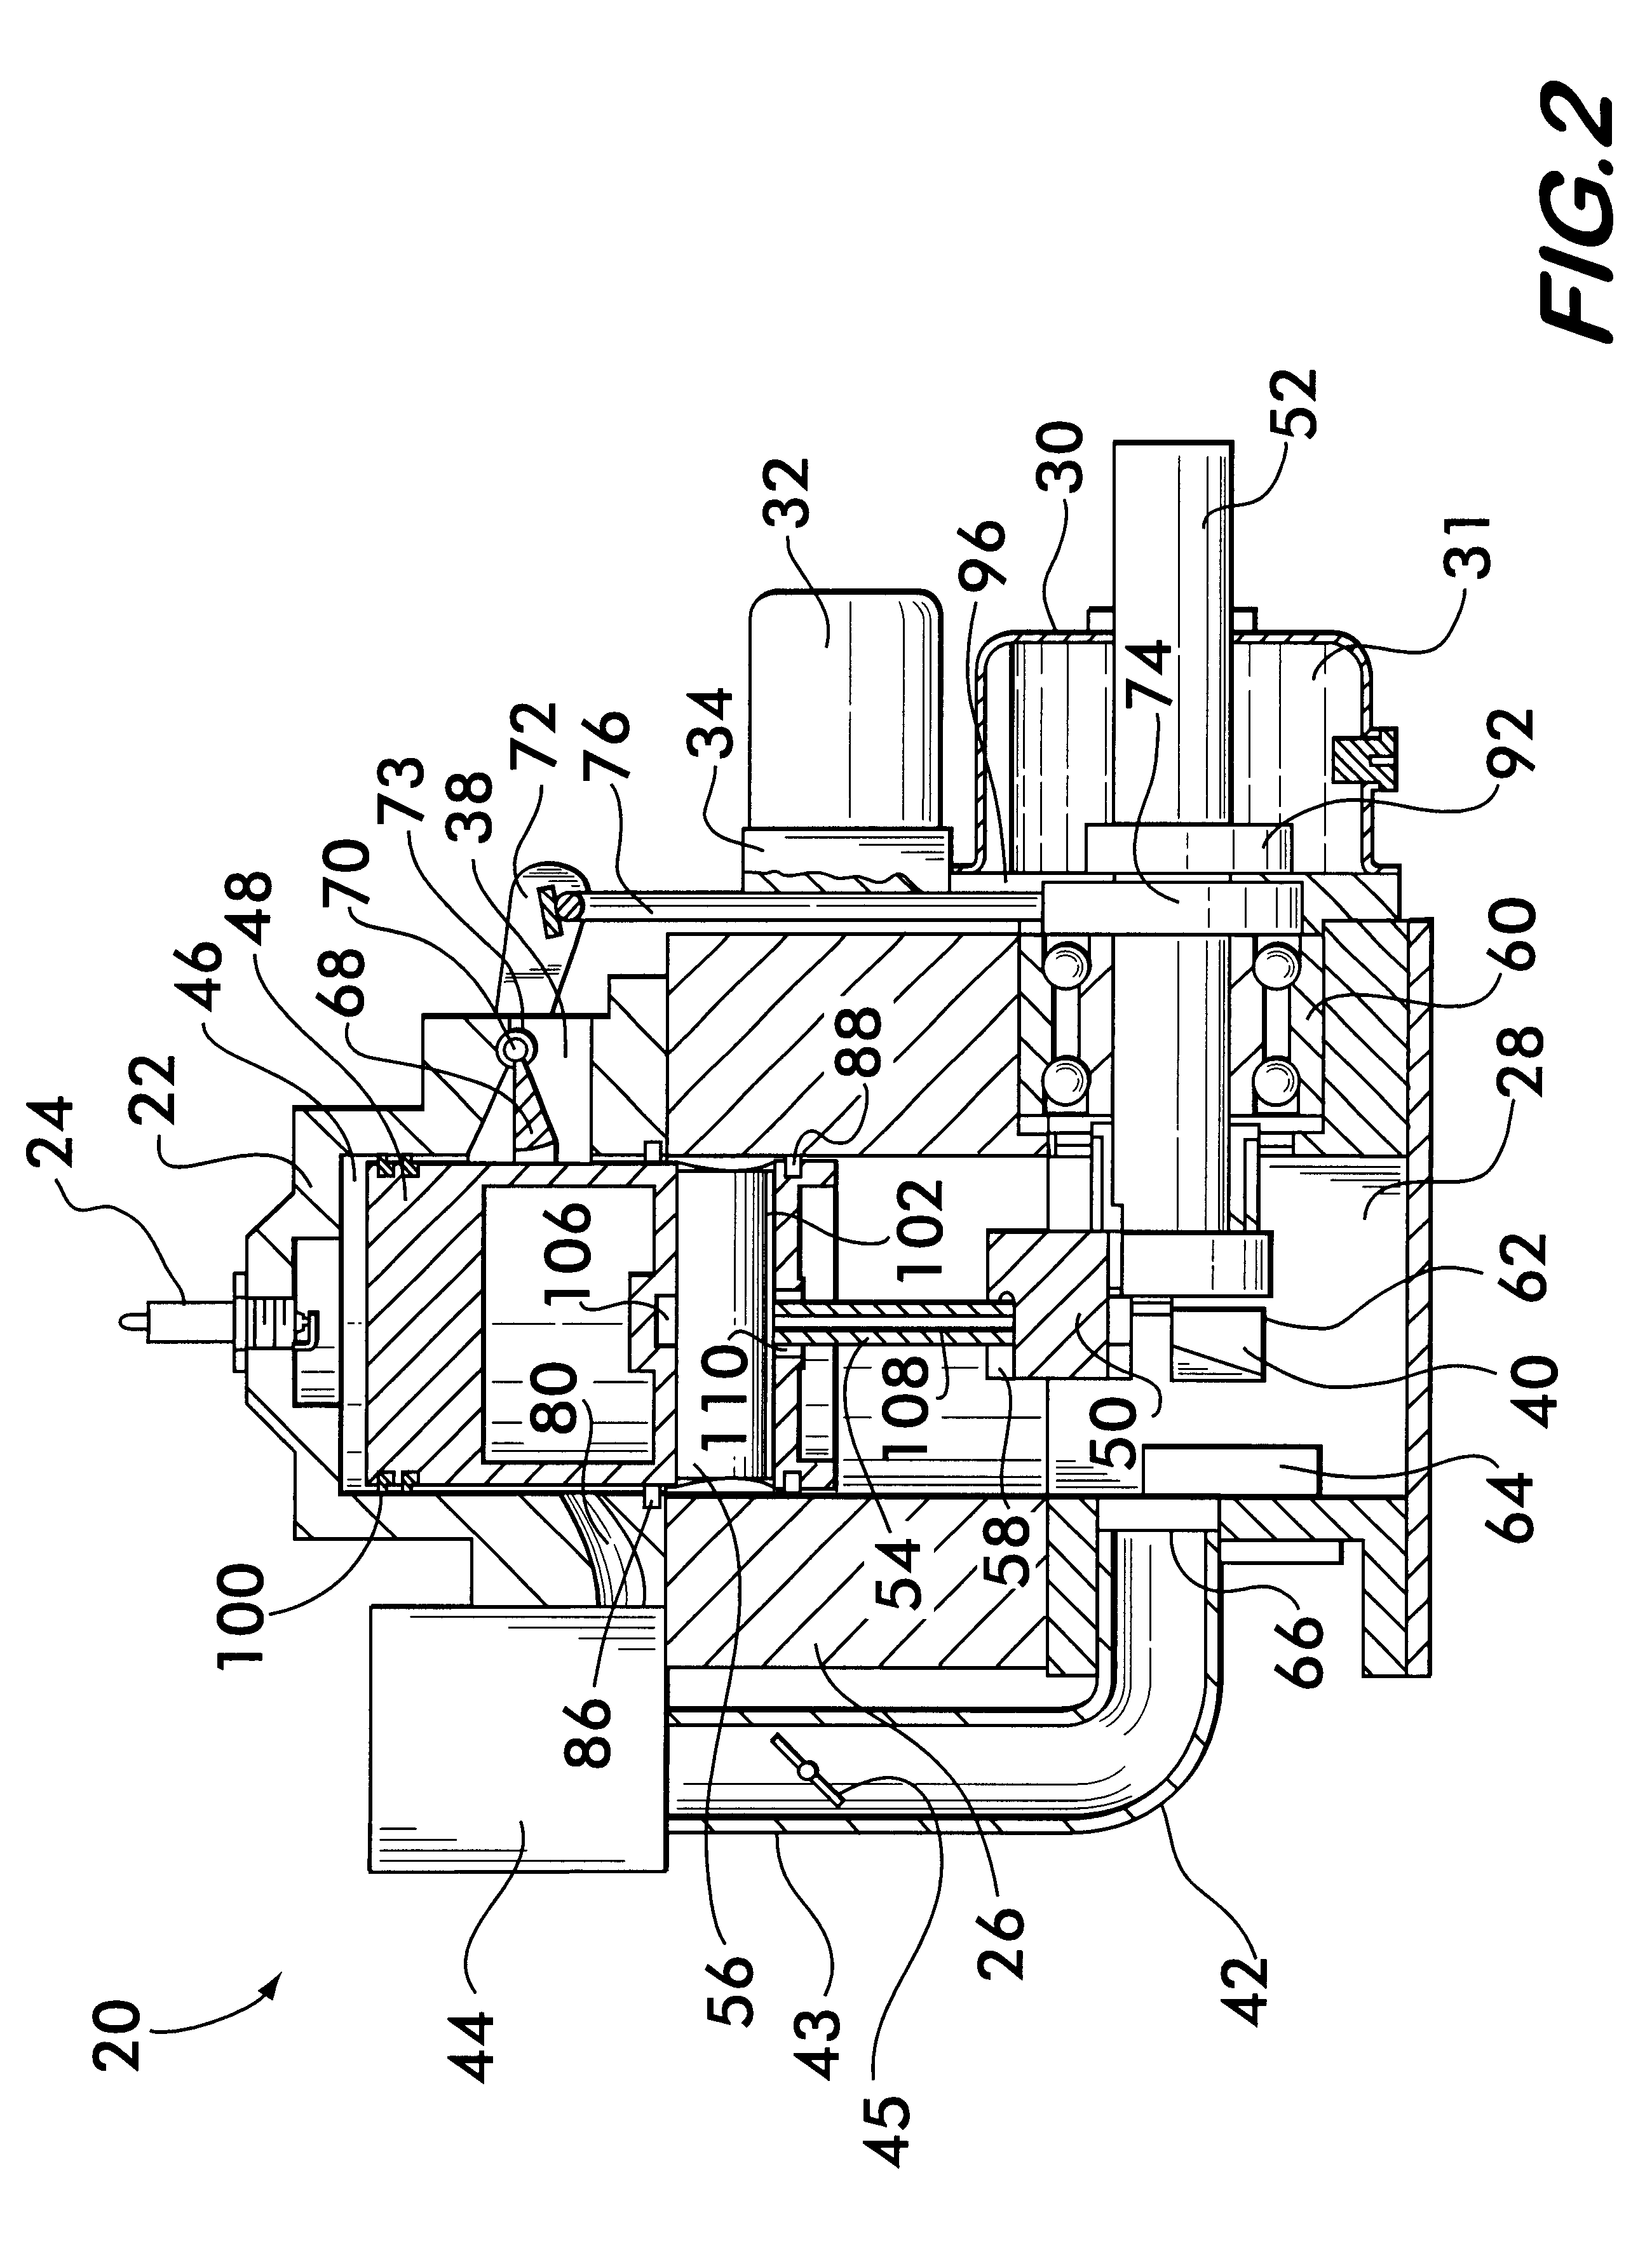 Engine with dry sump lubrication, separated scavenging and charging air flows and variable exhaust port timing